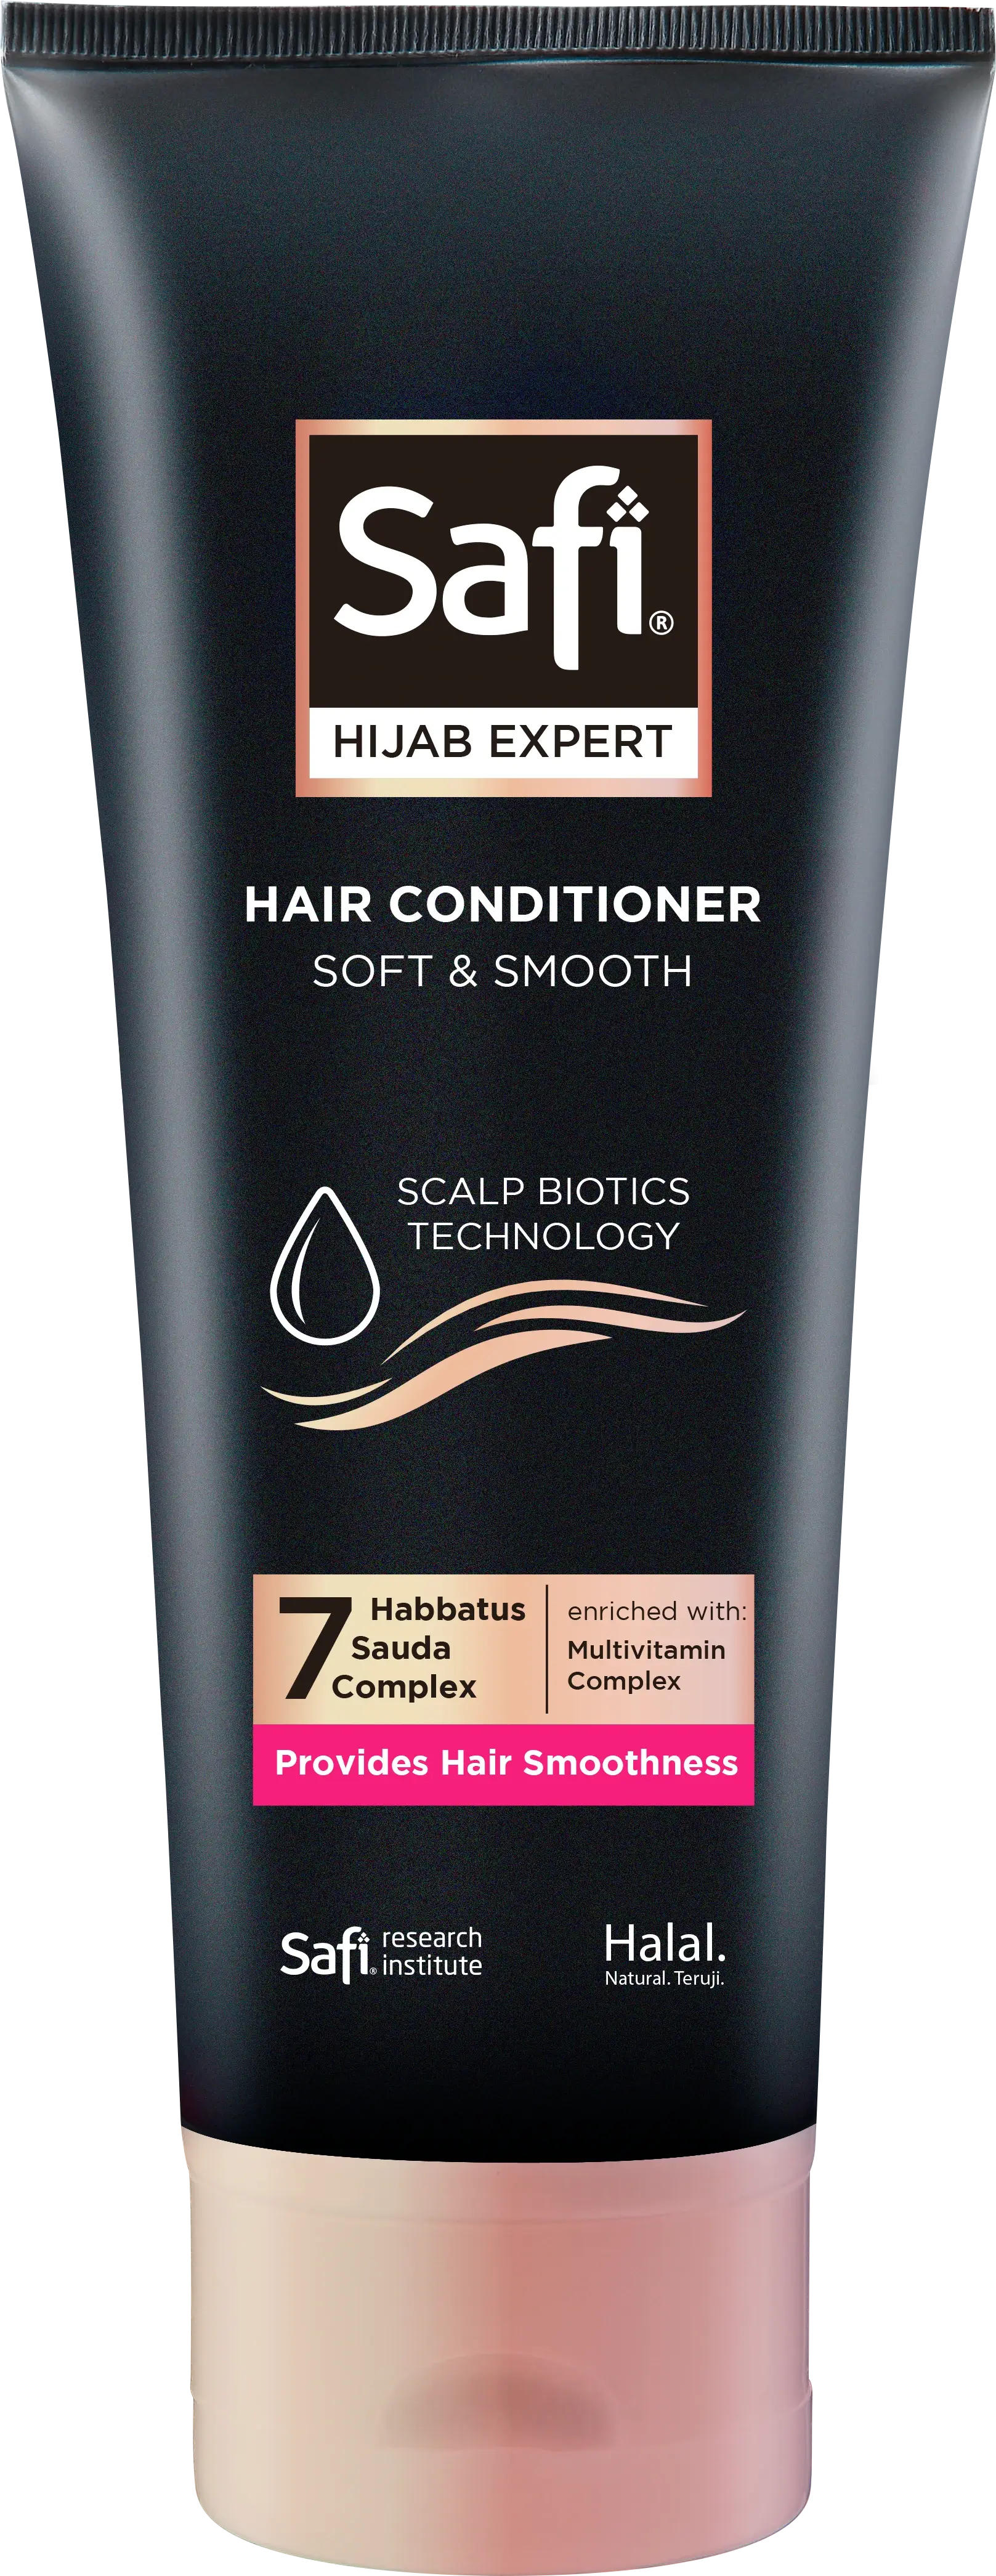 Safi Hijab Expert Soft & Smooth Hair Conditioner